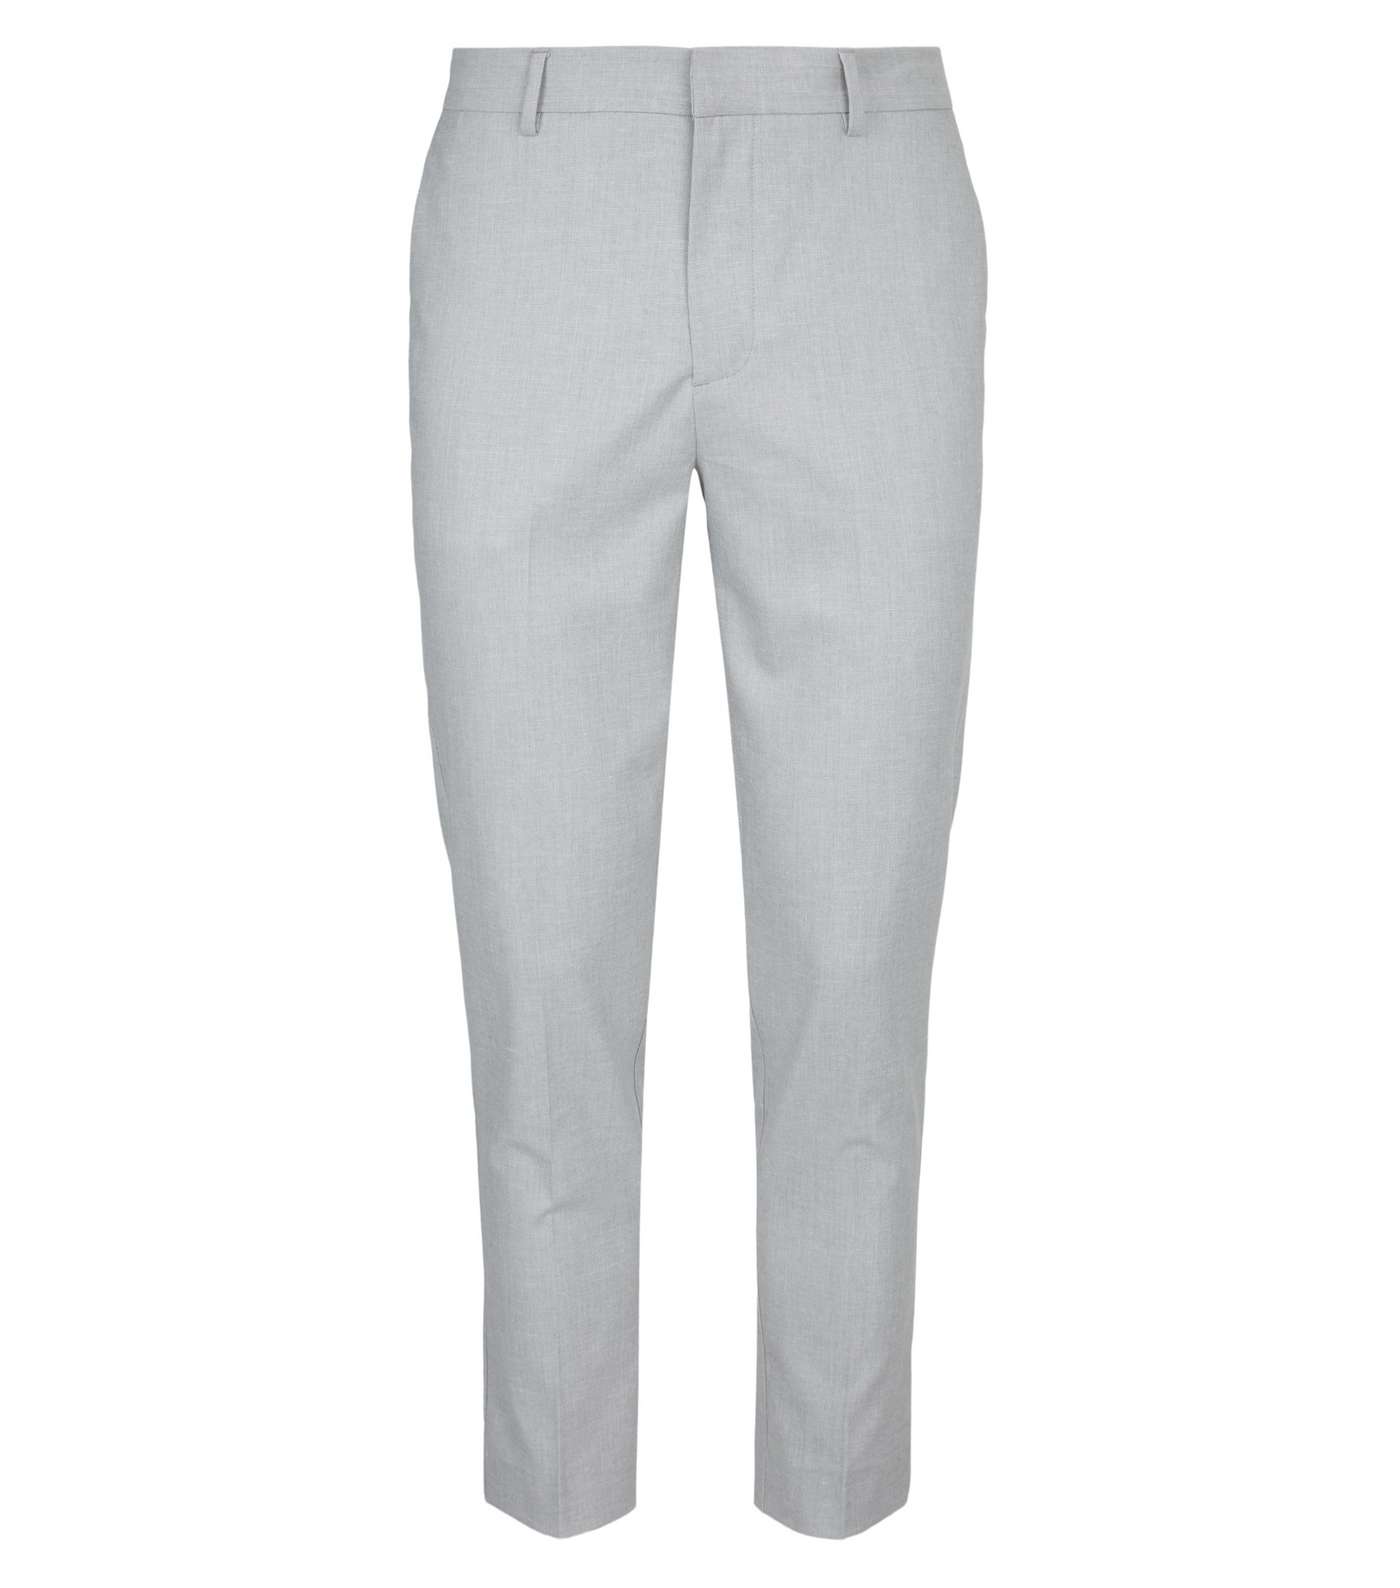 Pale Grey Slim Fit Trousers